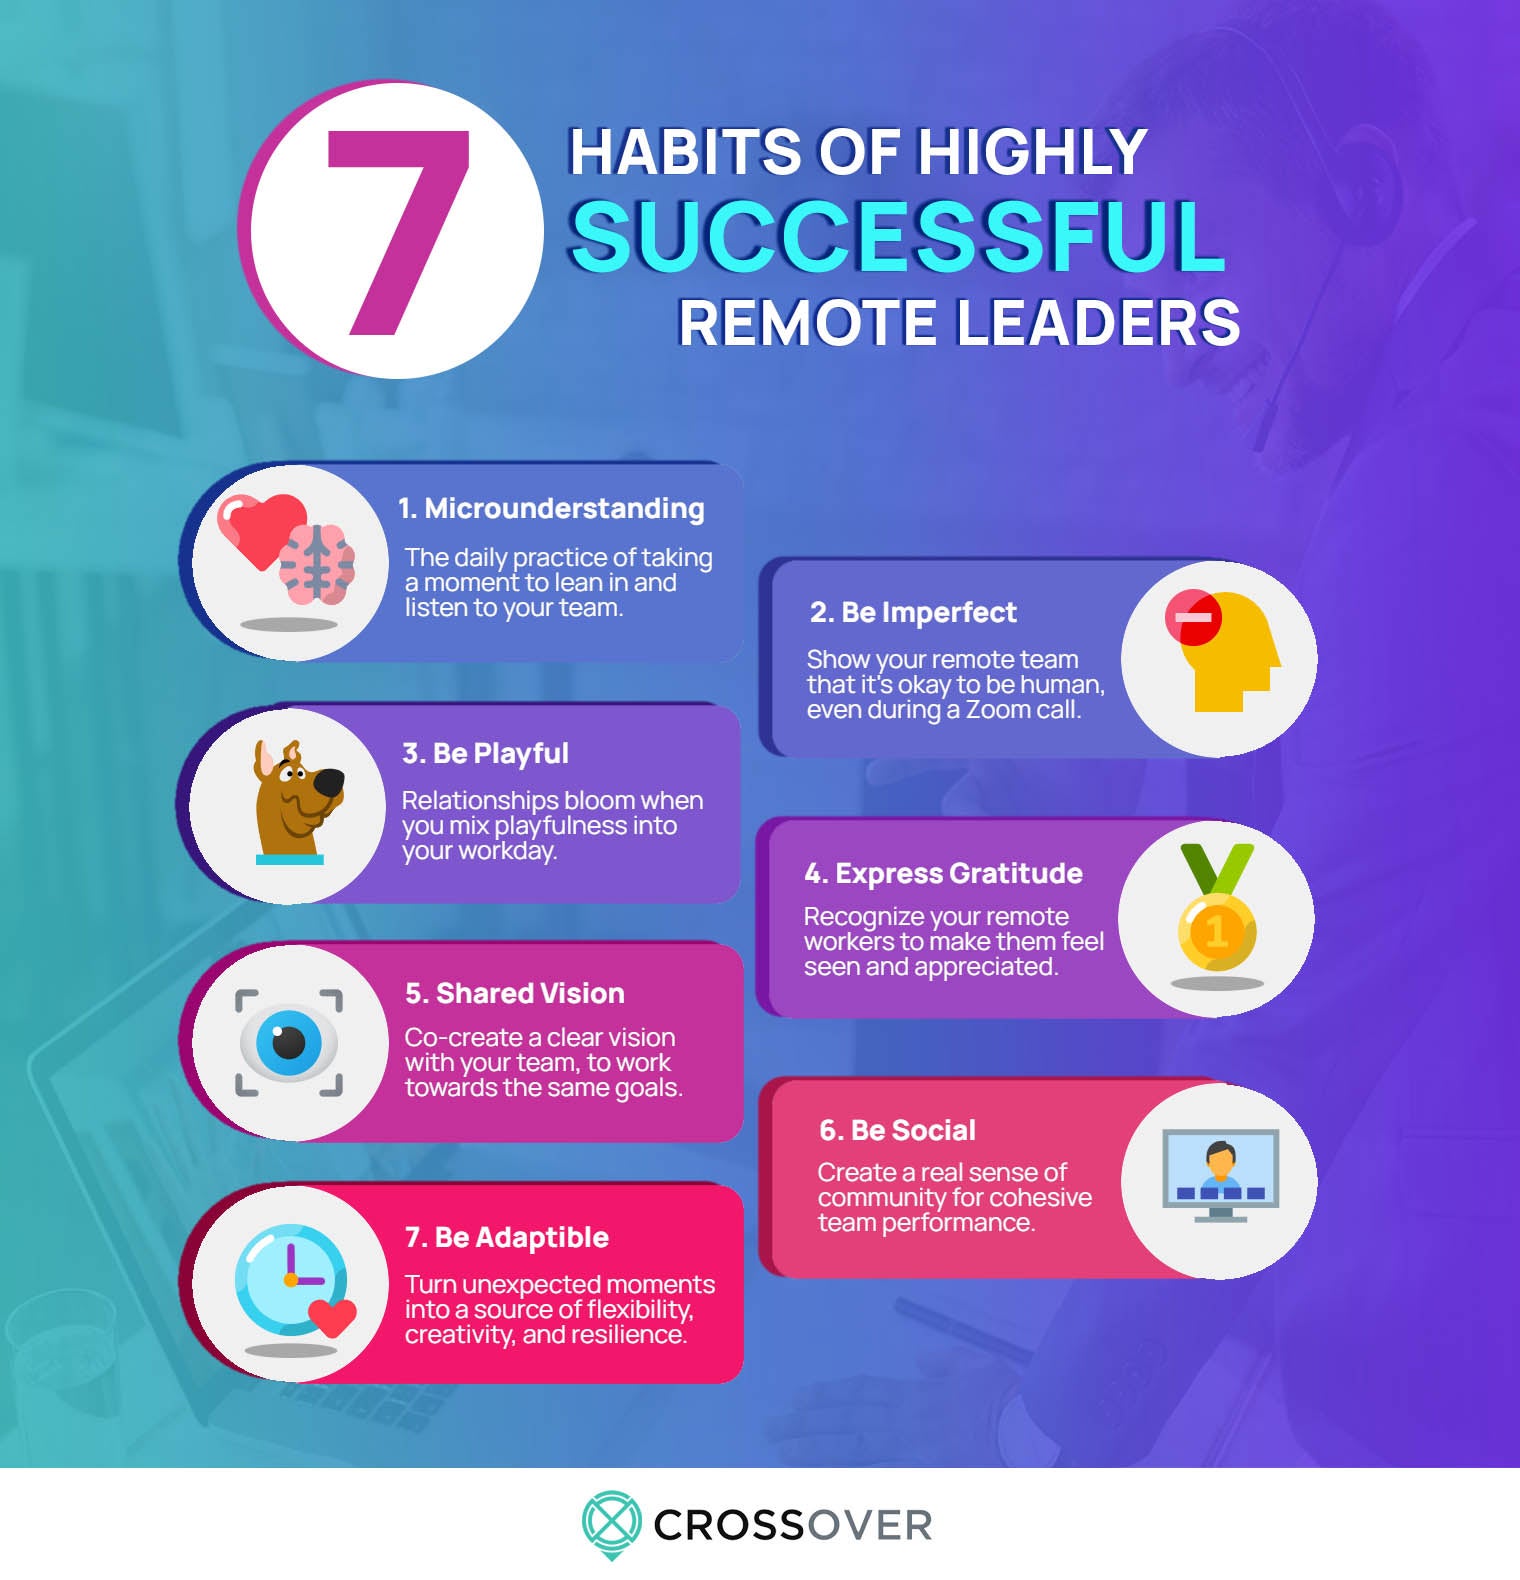 7 habits of highly successful remote leaders infographic